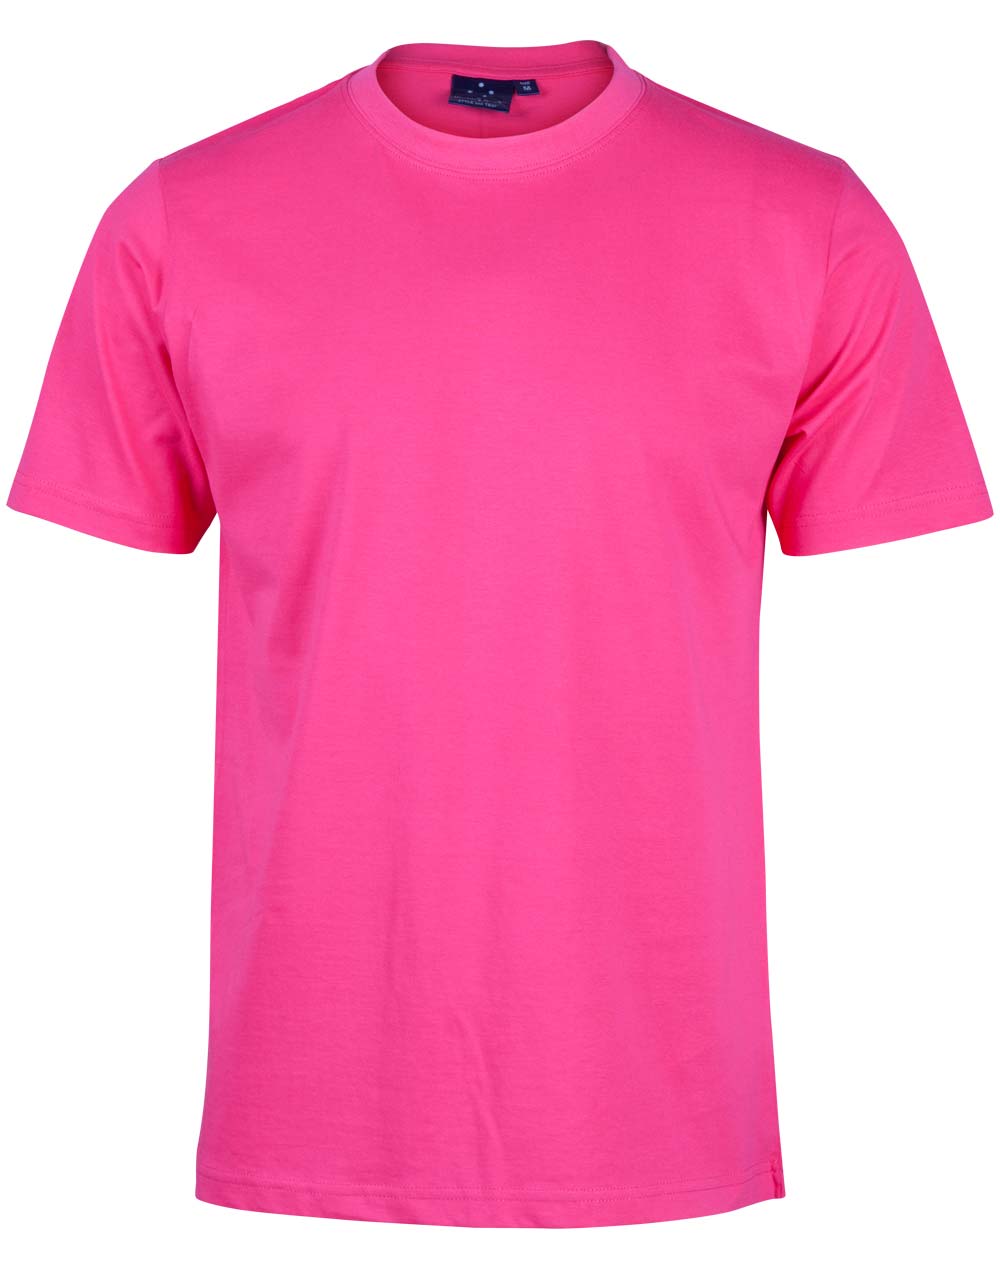 [TS37] Men's Cotton Semi Fitted Tee